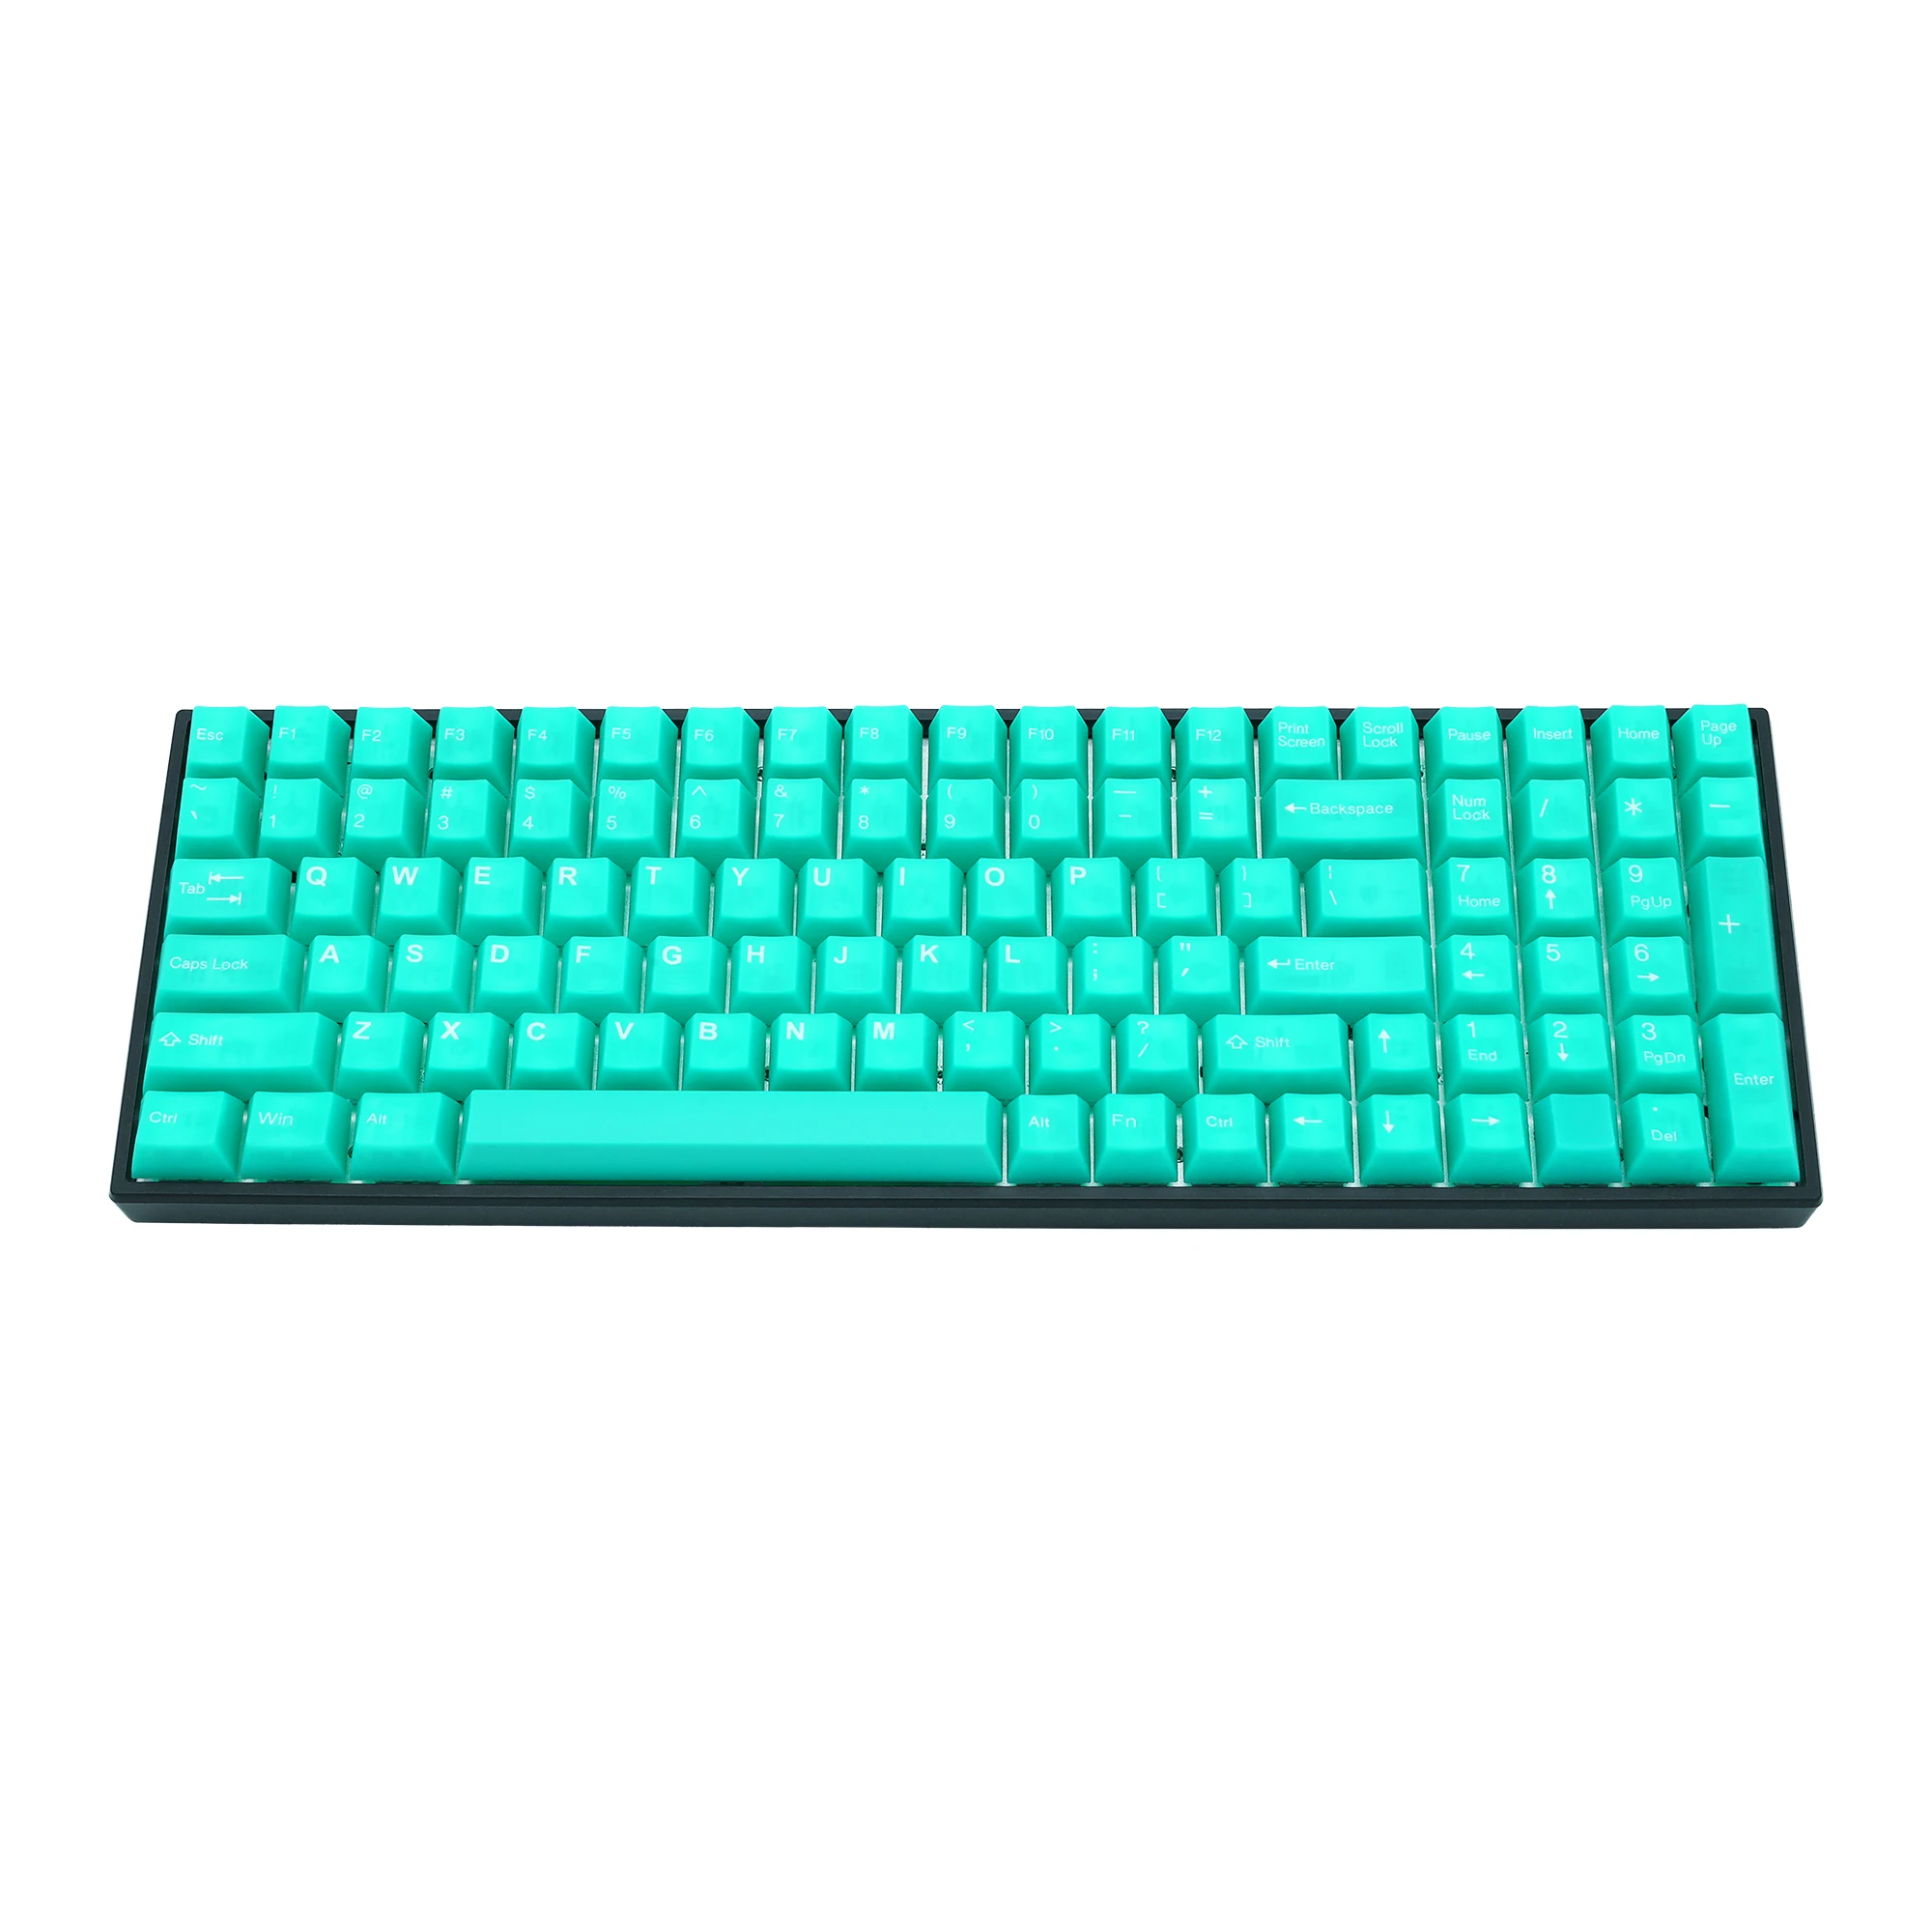 Taihao Haunted Jelly Jade ABS Doubleshot Keycap Translucent Cubic for mechanical keyboard color of Green Colorway 2 - Pudding Keycap